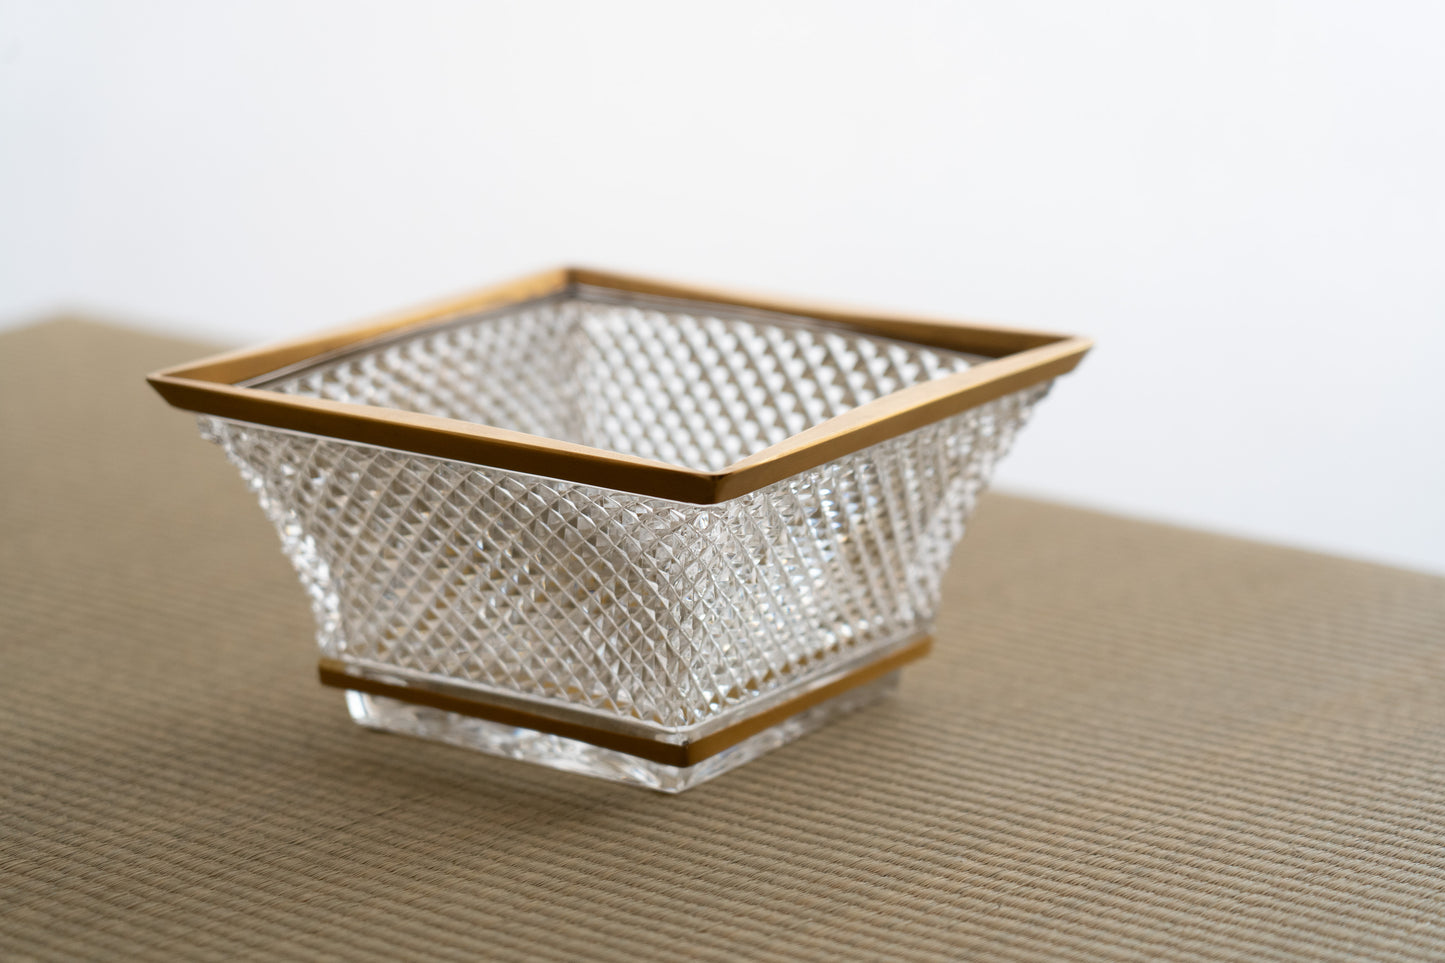 Gilded square shaped cut-glass bowl with plain diamonds on sides, Harumi Baccarat［Reproduction］